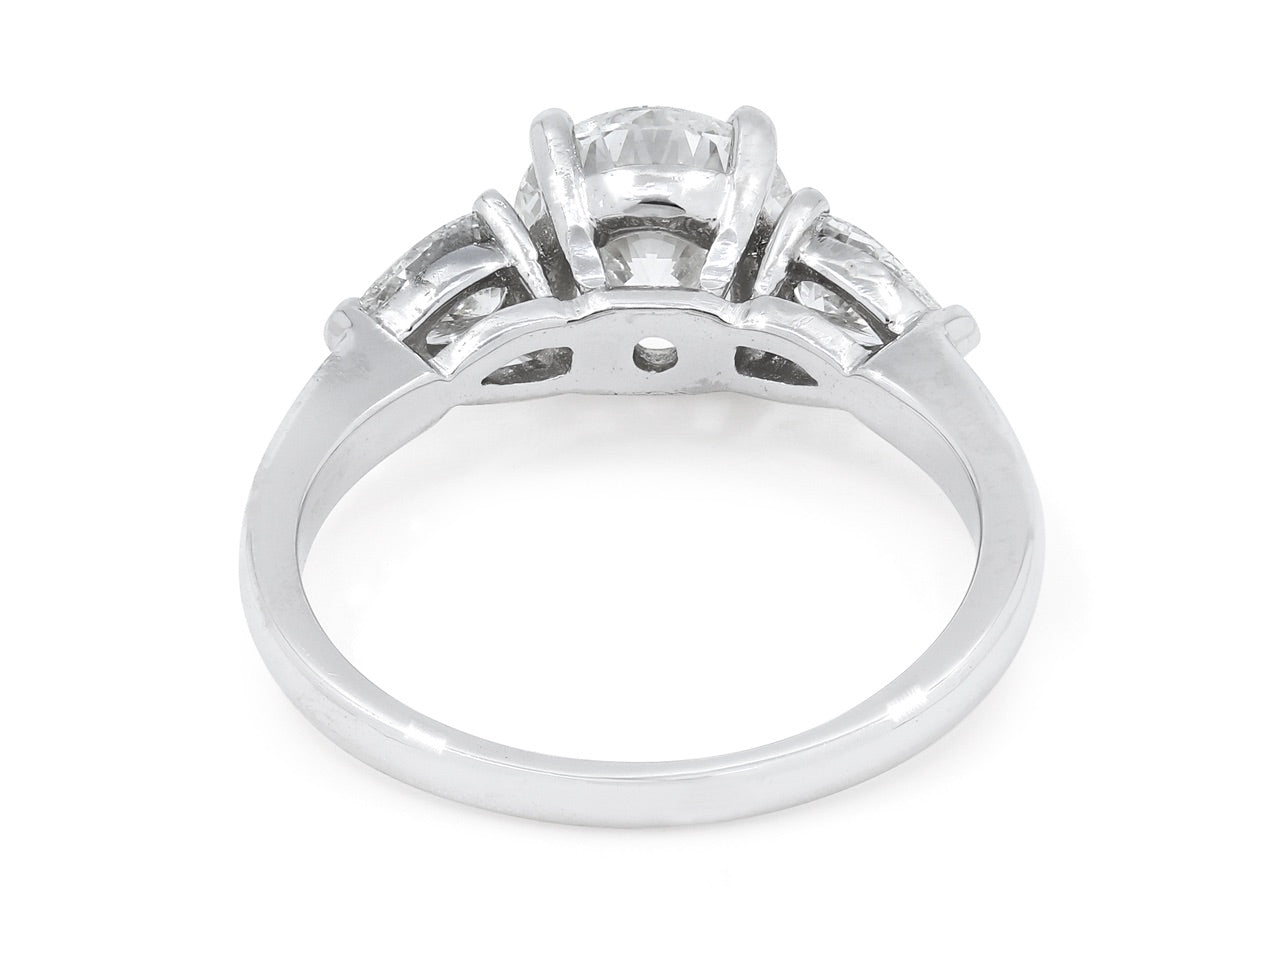 Diamond Solitaire Ring, 1.42 carat H/SI-1 with Pear-shape Diamond Shoulders, in Platinum